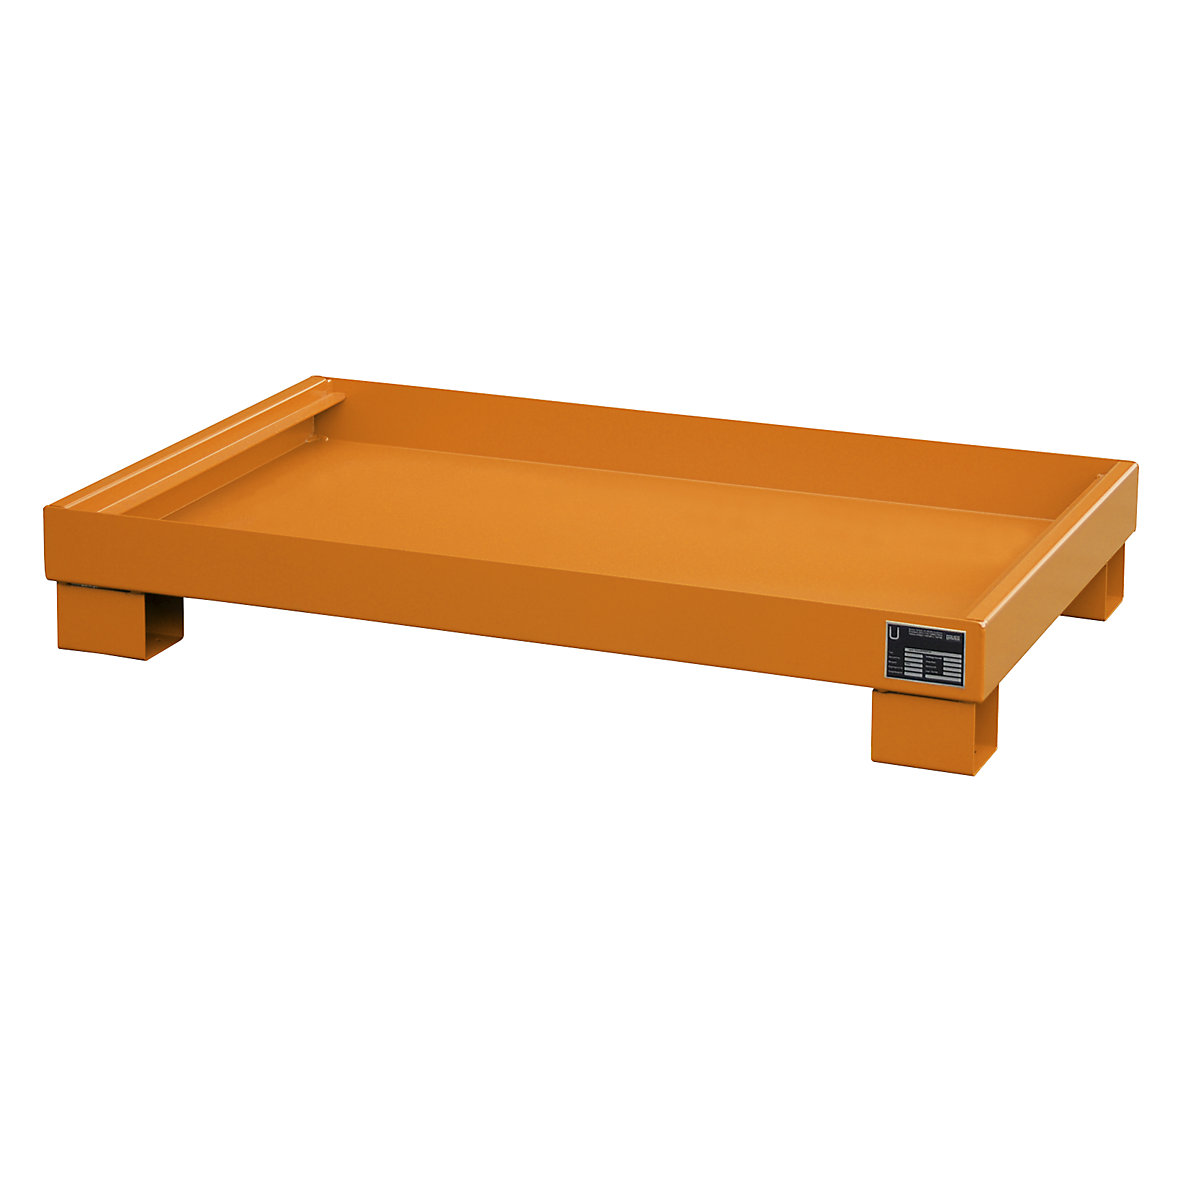 Steel sump tray for 60 l drum - eurokraft pro